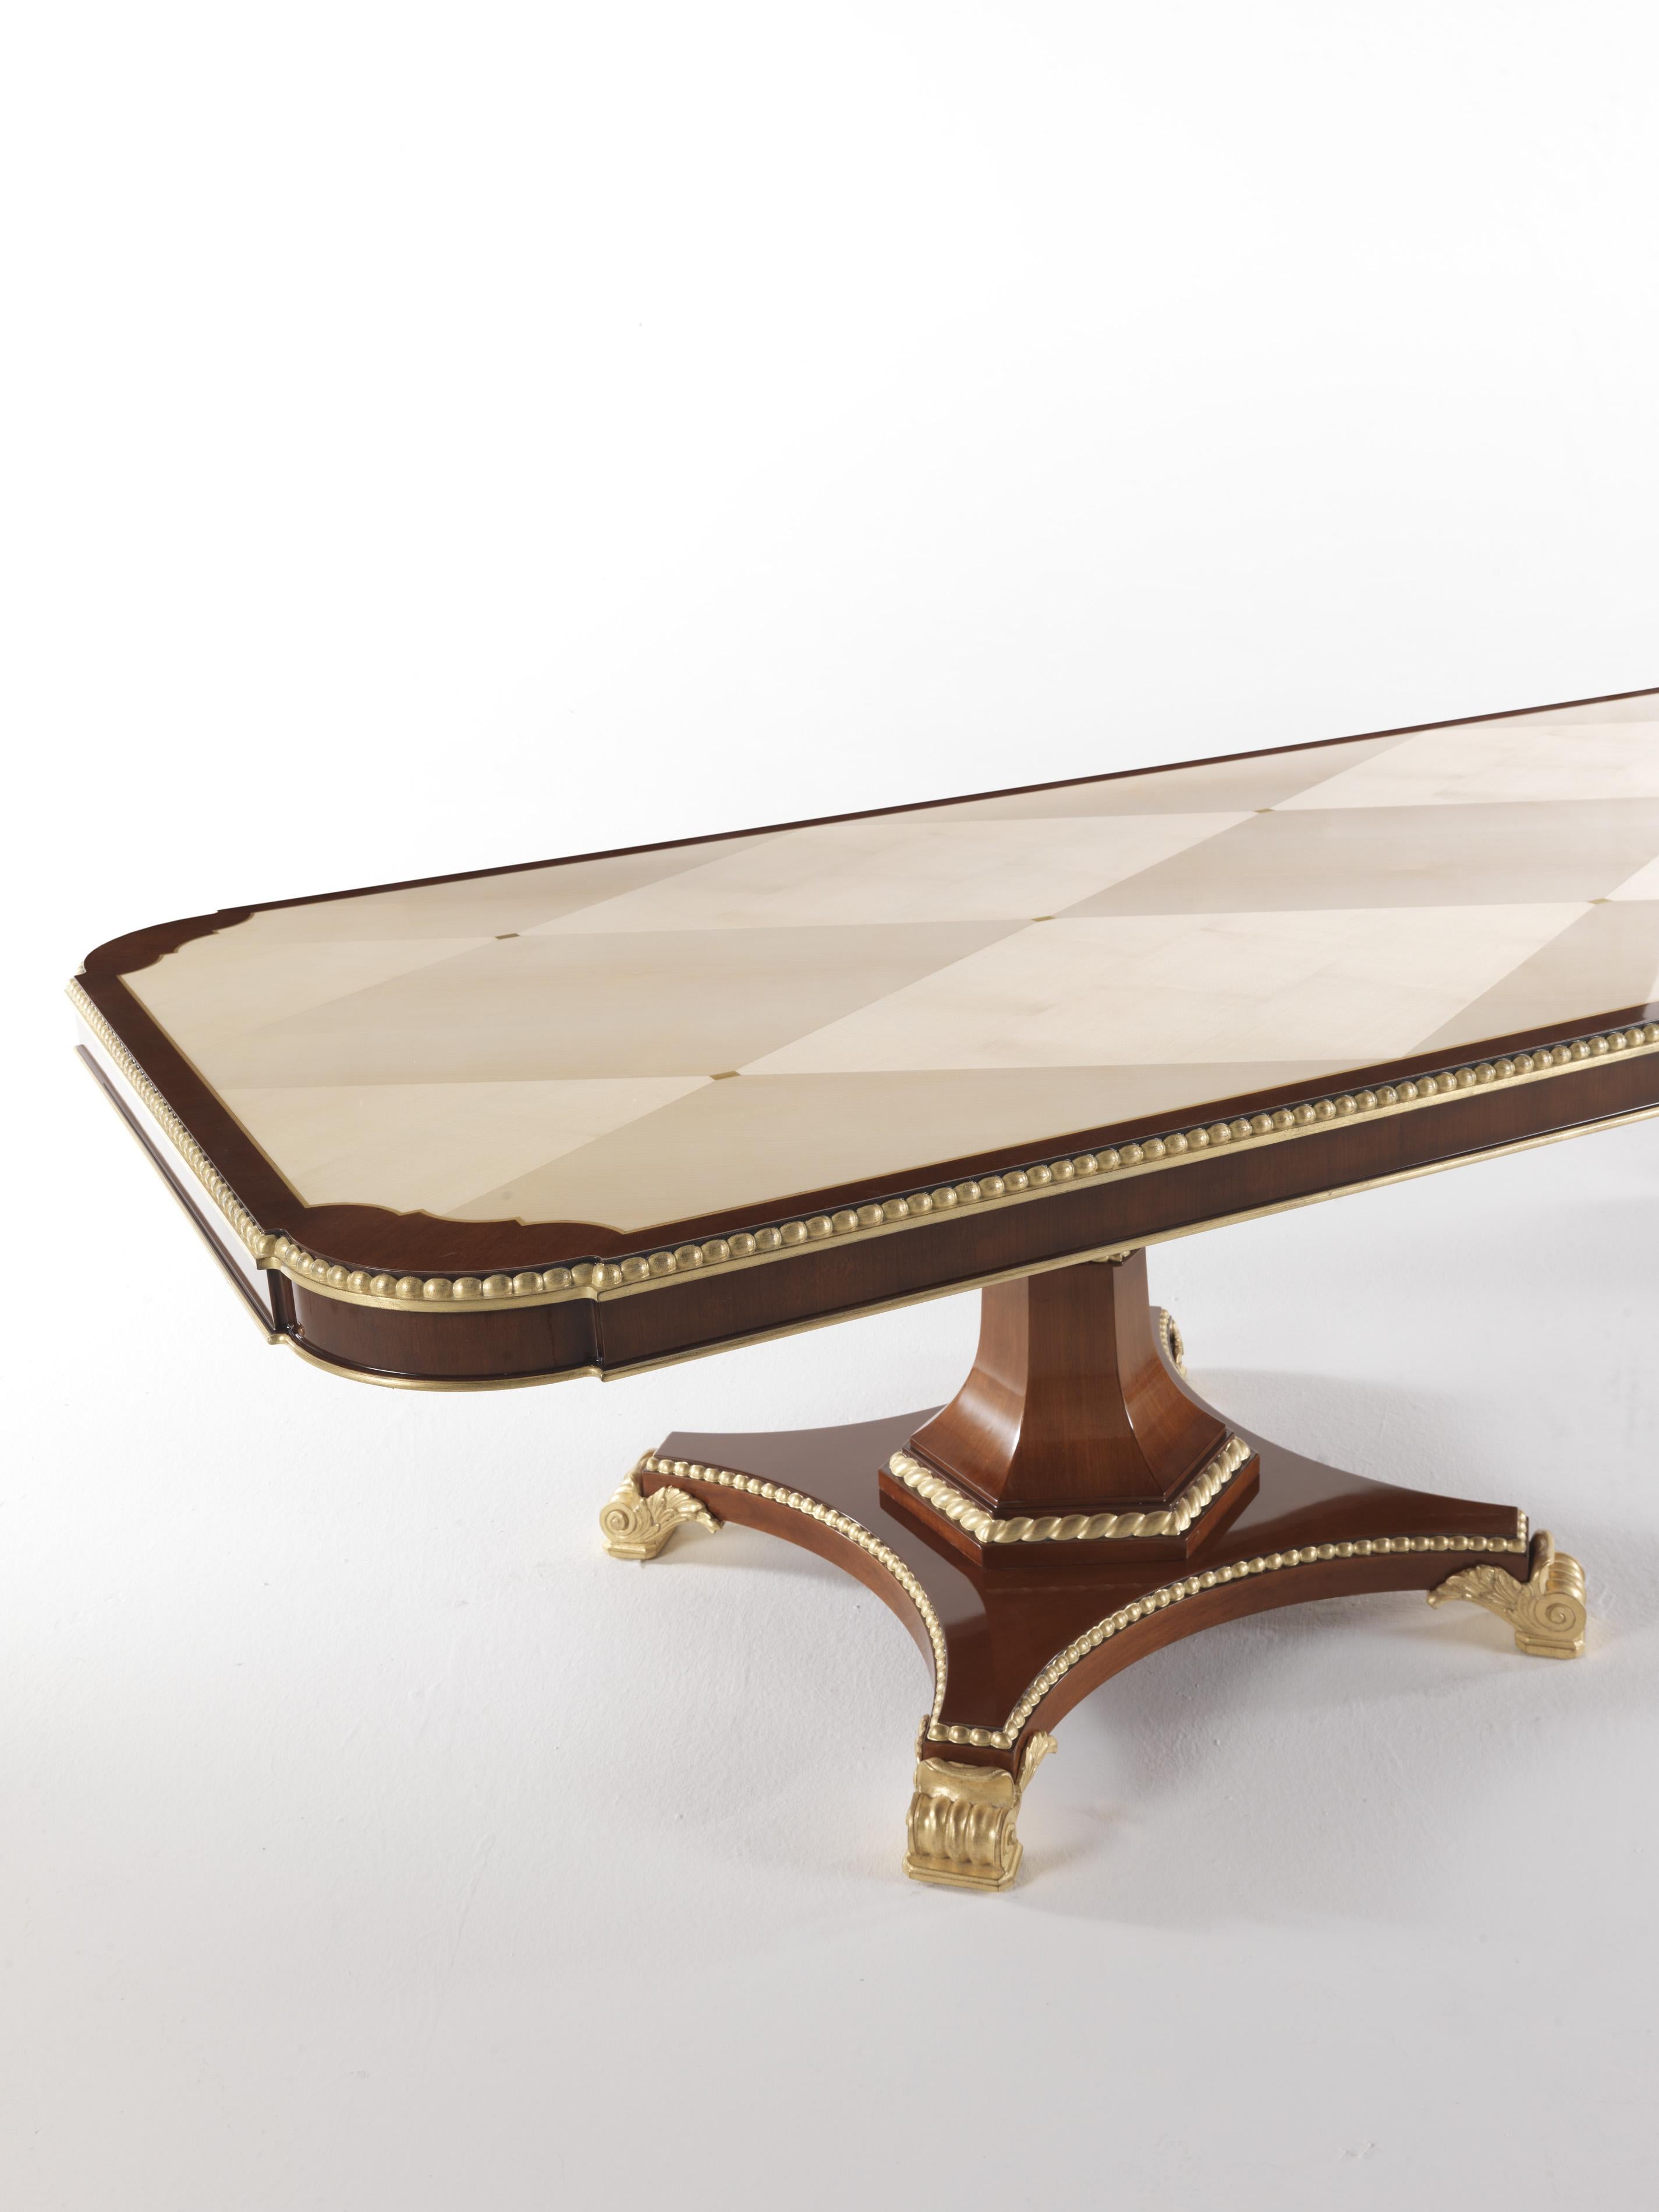 Italian 21st Century Etoile Dining Table with Natural Maple Insert and Brass Inlays For Sale